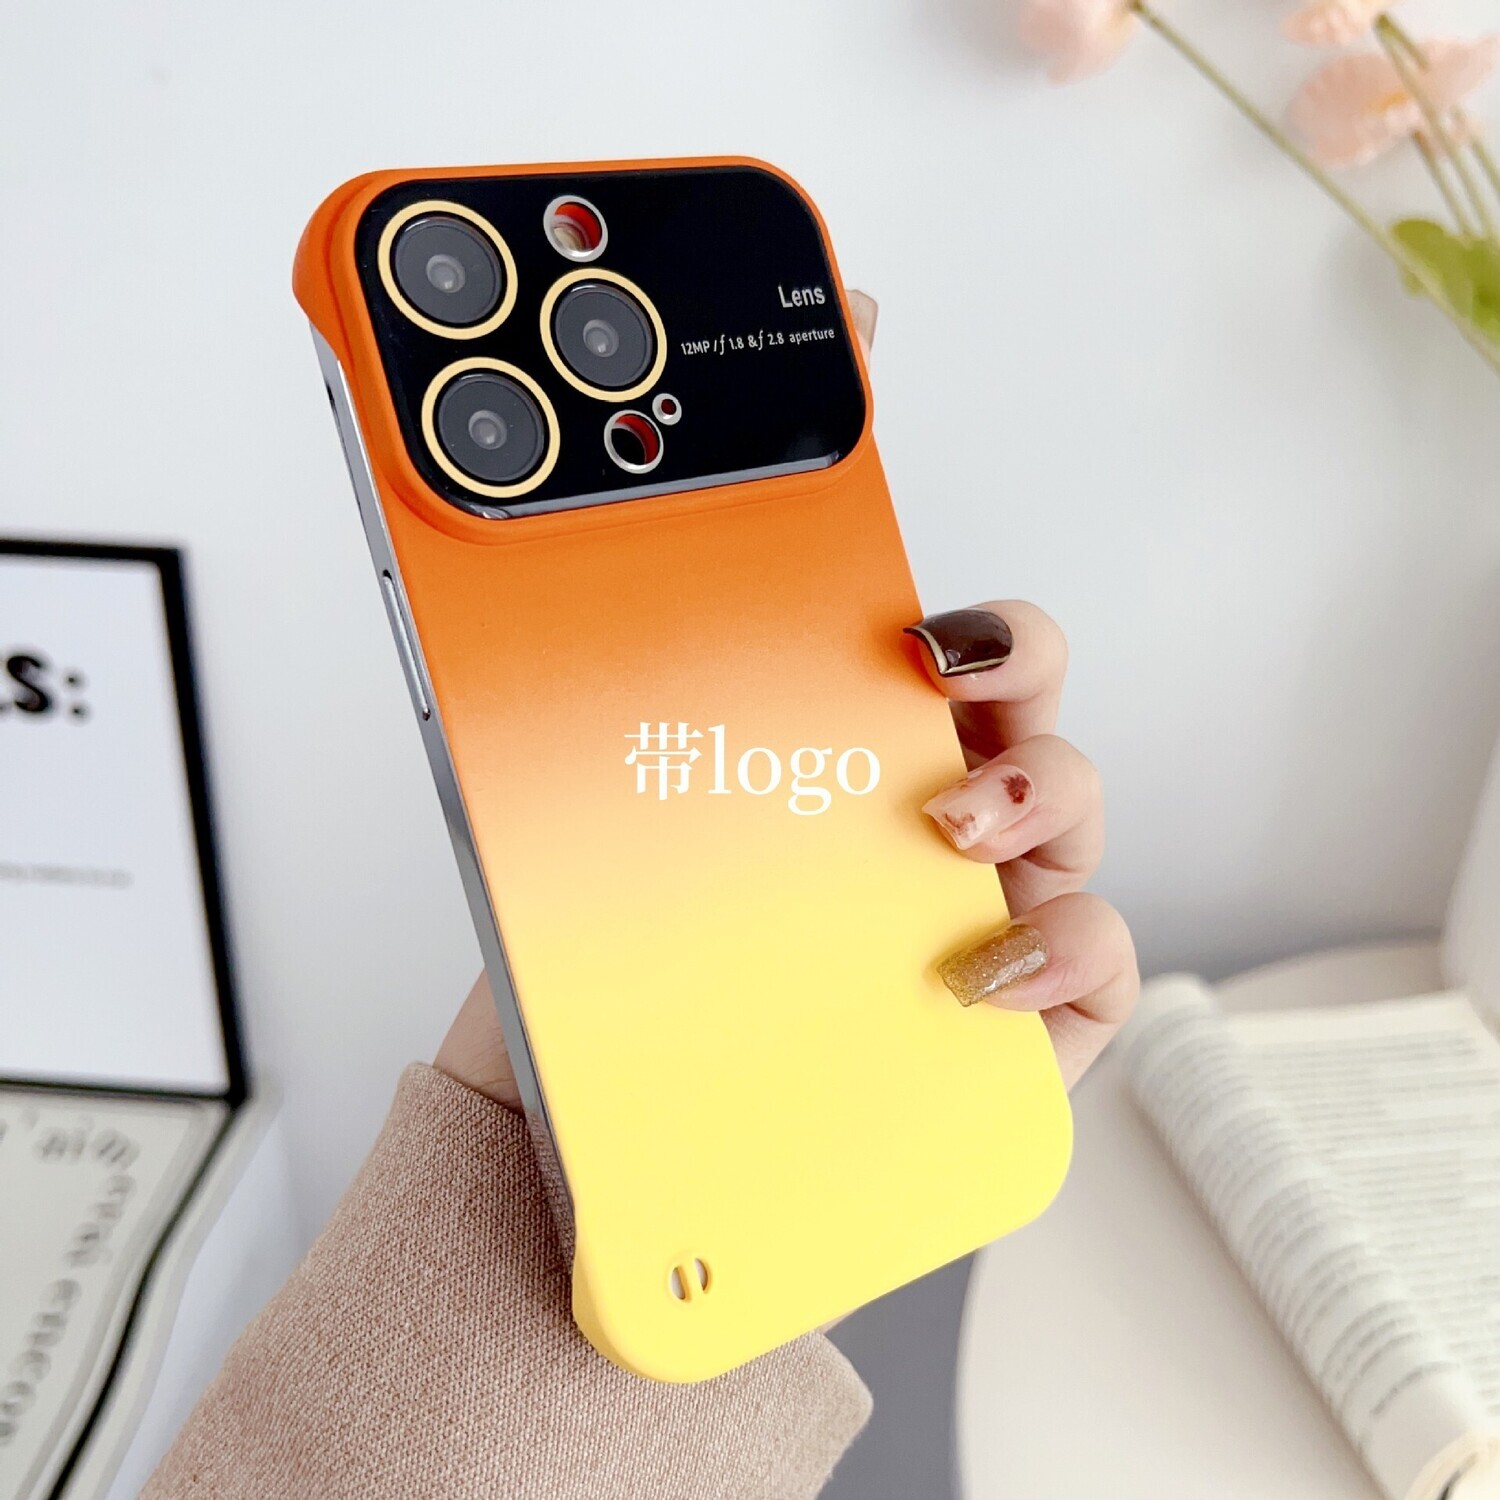 Large Window Borderless Ultra-thin gradient color borderless with HD lens film iPhone Case (with Logo), Color: Orange+logo (two-color gradient-borderless large window shell), Model: Iphone 14promax